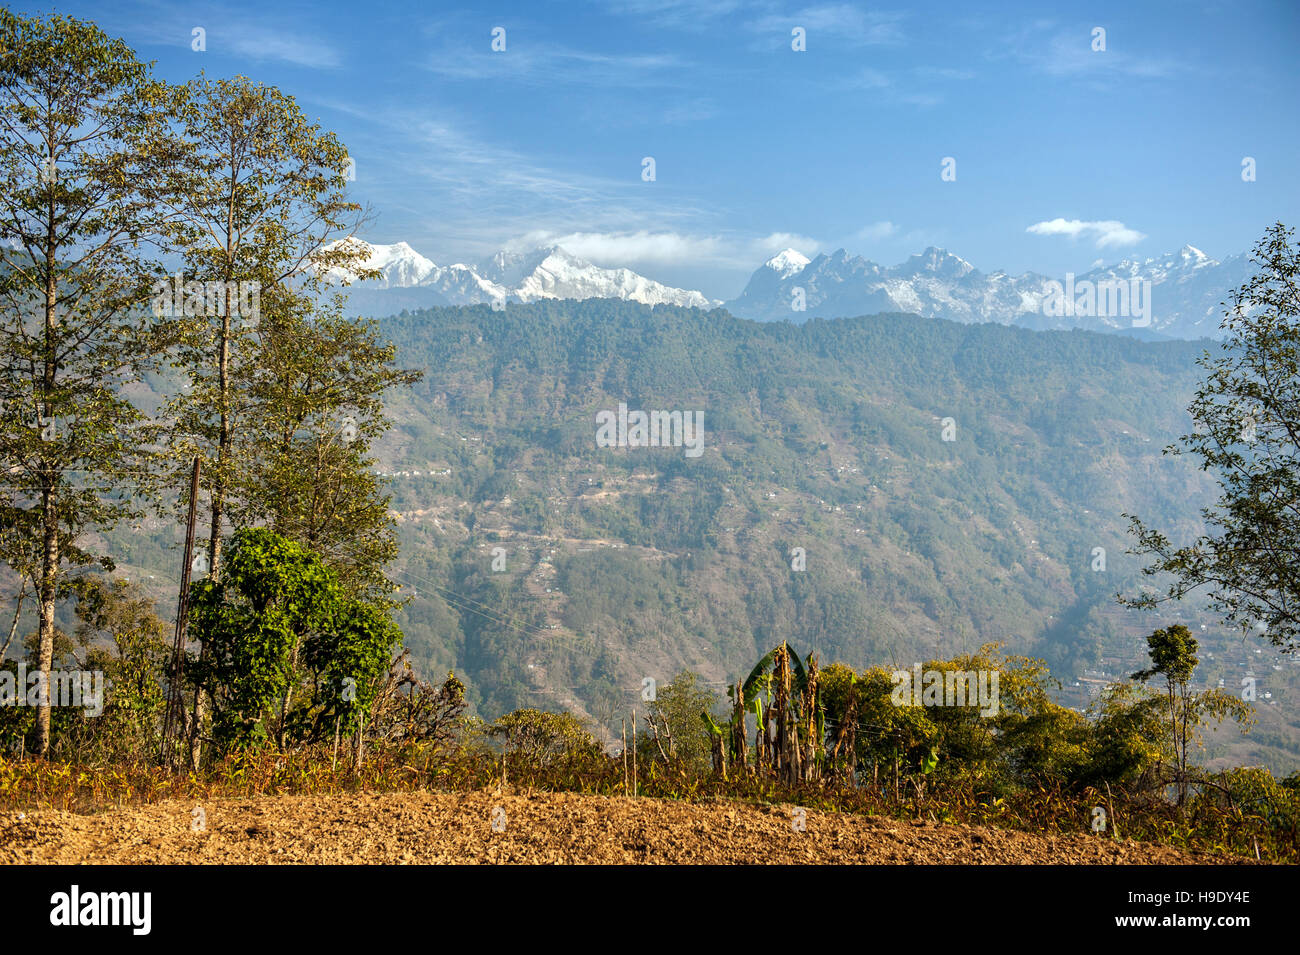 View over the Himalayas and Kanchenjunga, the world's third highest mountain, from Shakti Himalaya's home stay. Stock Photo